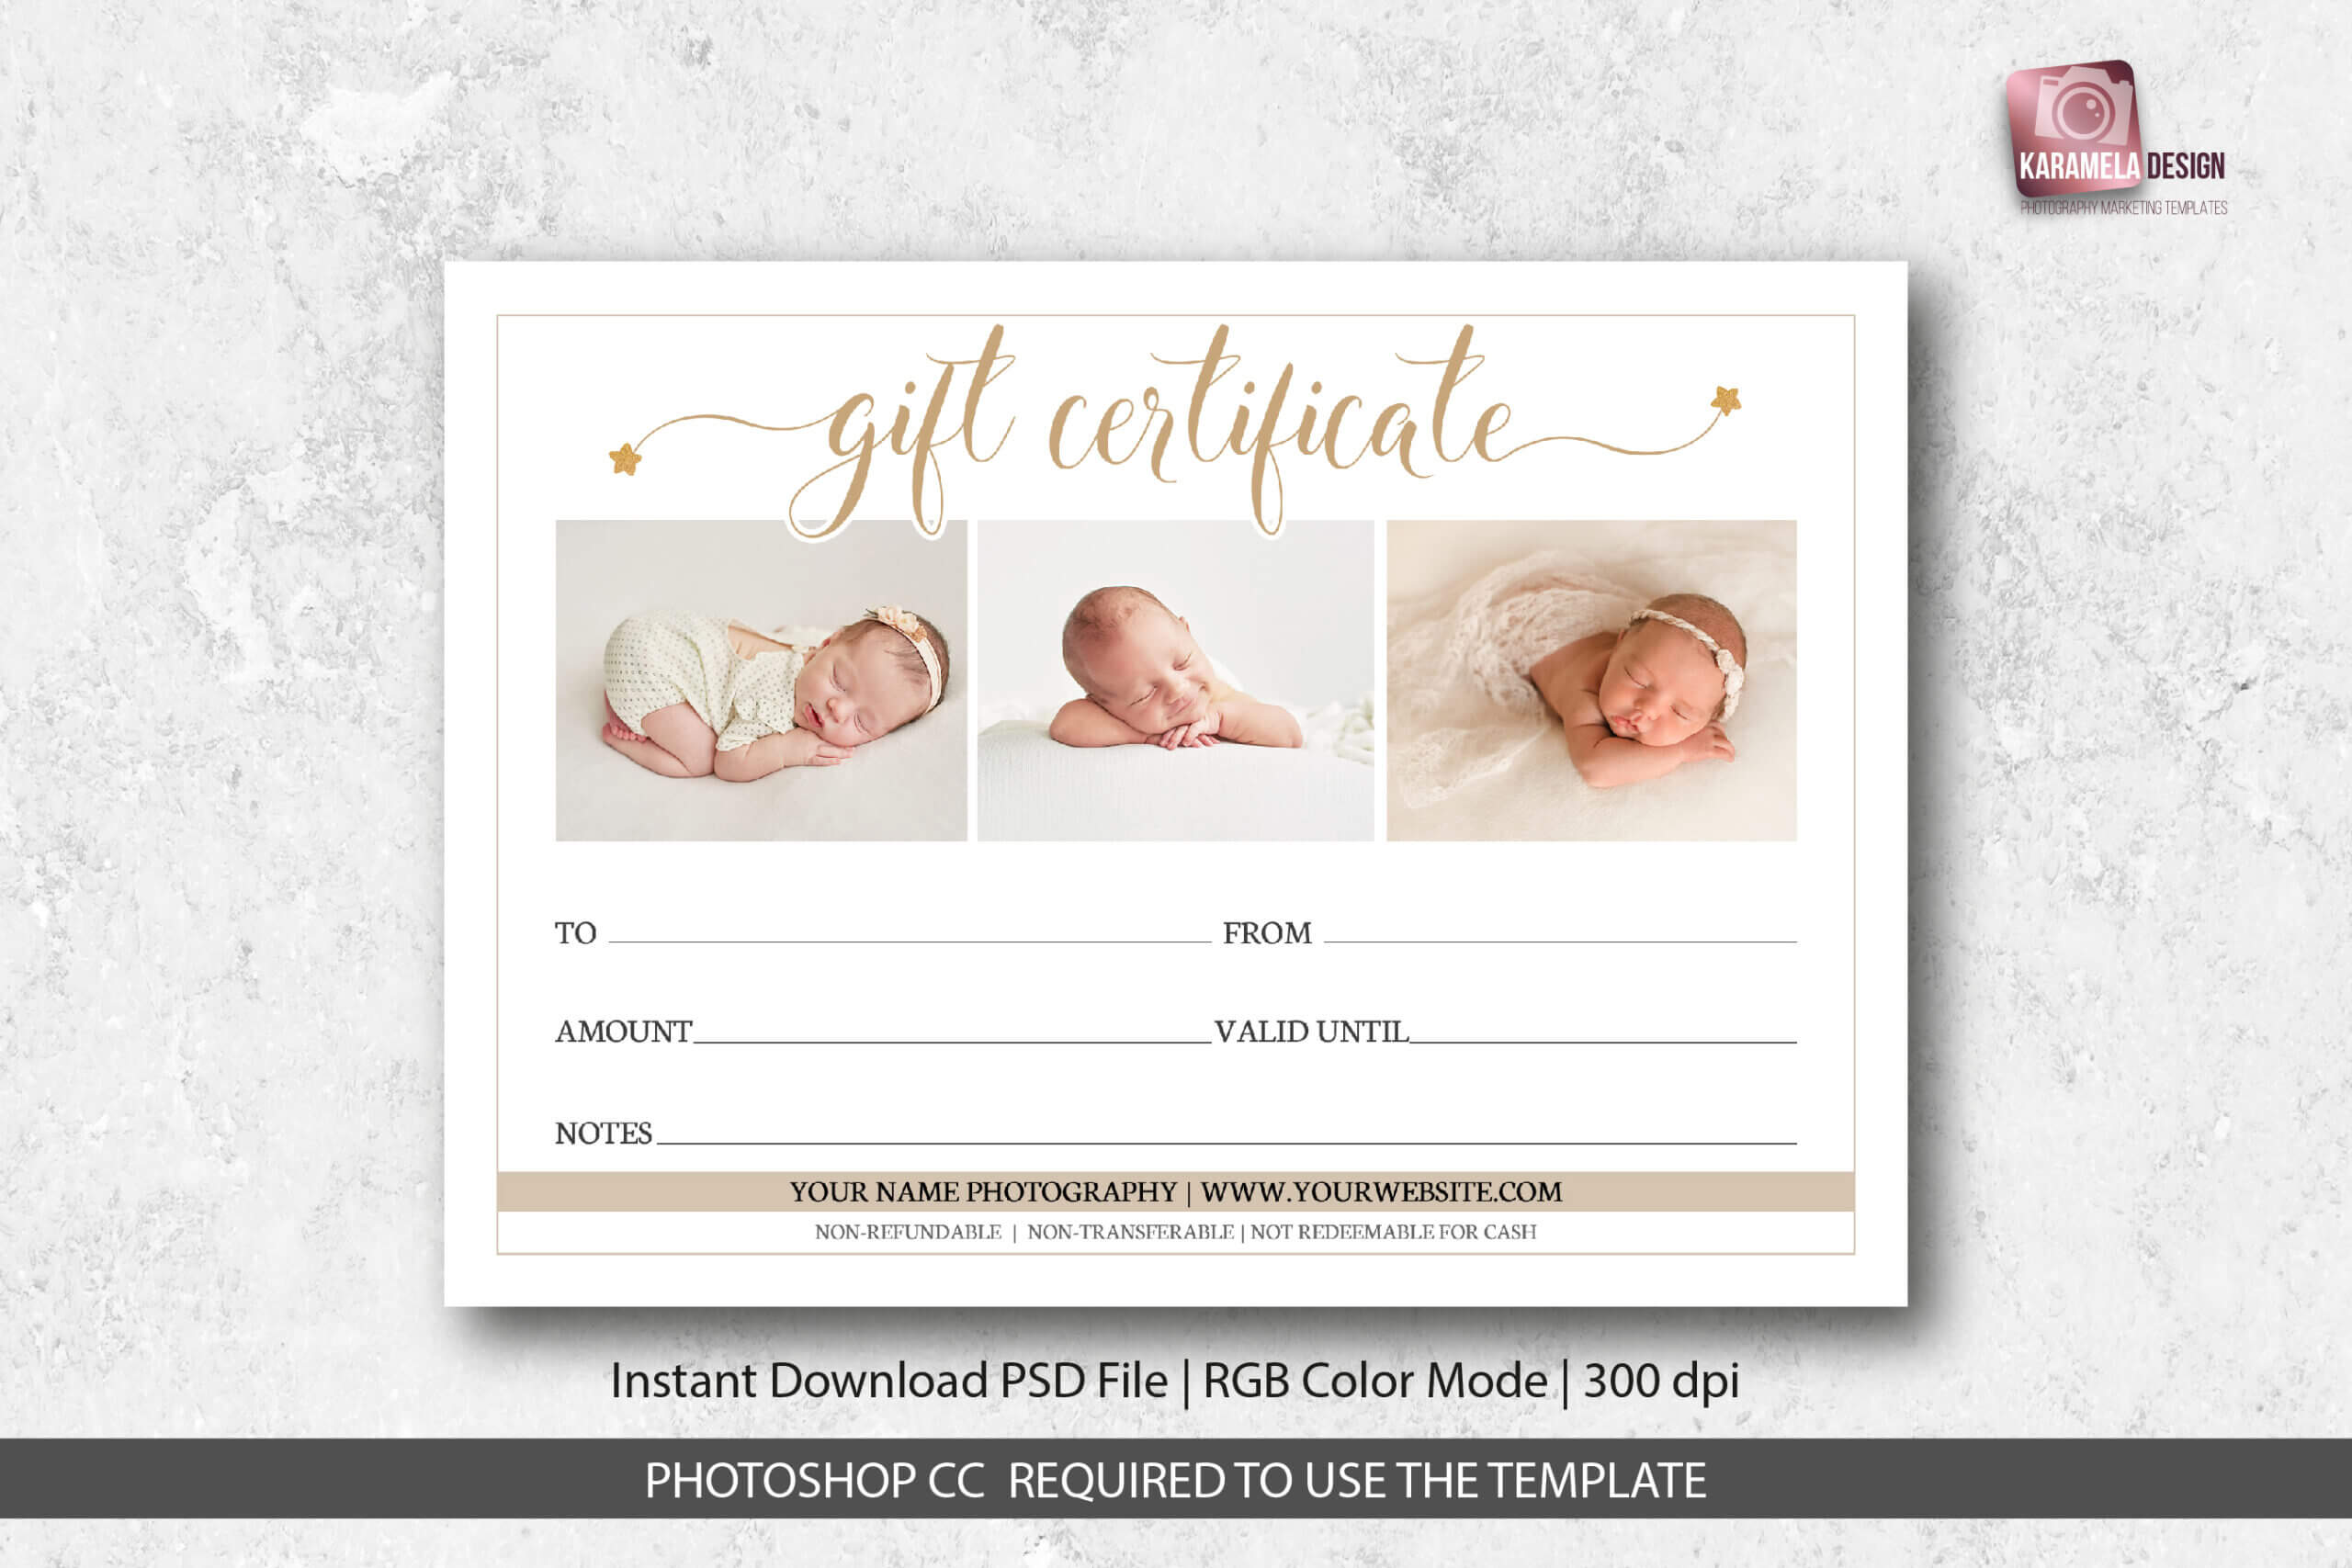 Photography Studio Gift Certificate Template Intended For Photoshoot Gift Certificate Template